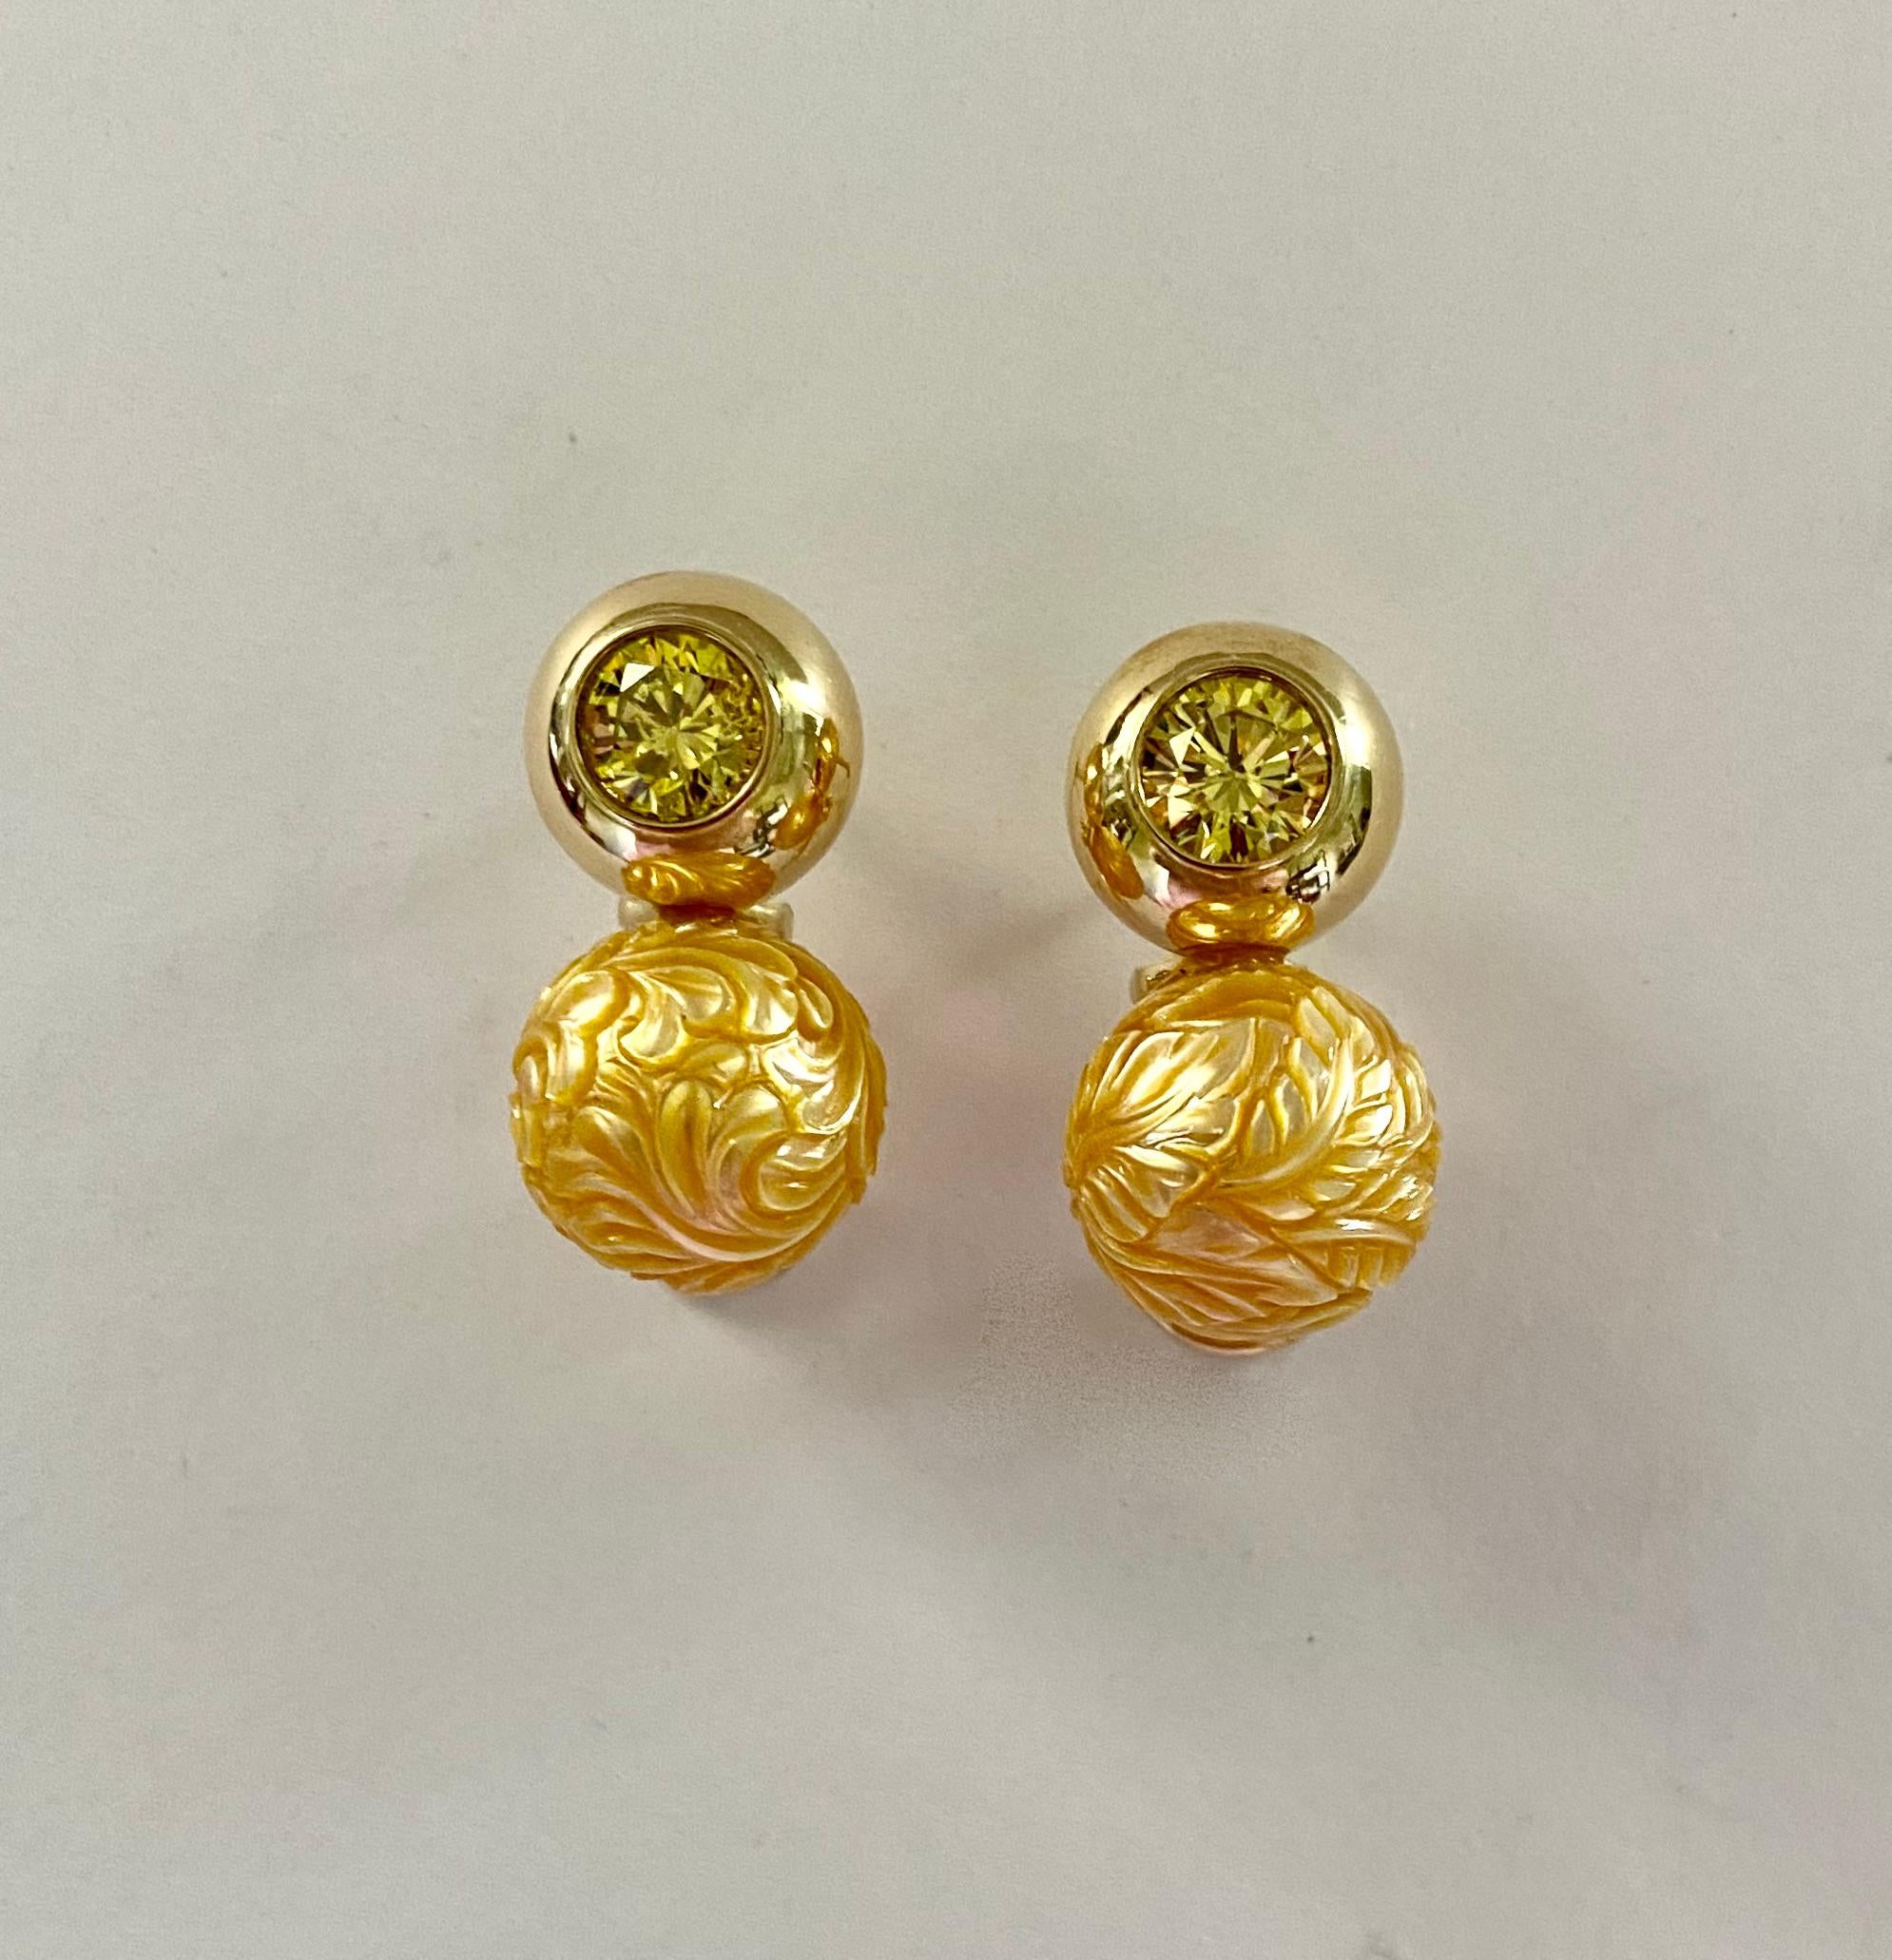 Carved golden South Seas pearls are paired with yellow sapphires in the these earrings perfect for the discerning jewelry collector.  The 12.5mm buttery yellow pearls (origin: Australia) were expertly carved in Bali.  The lively, perfectly matched